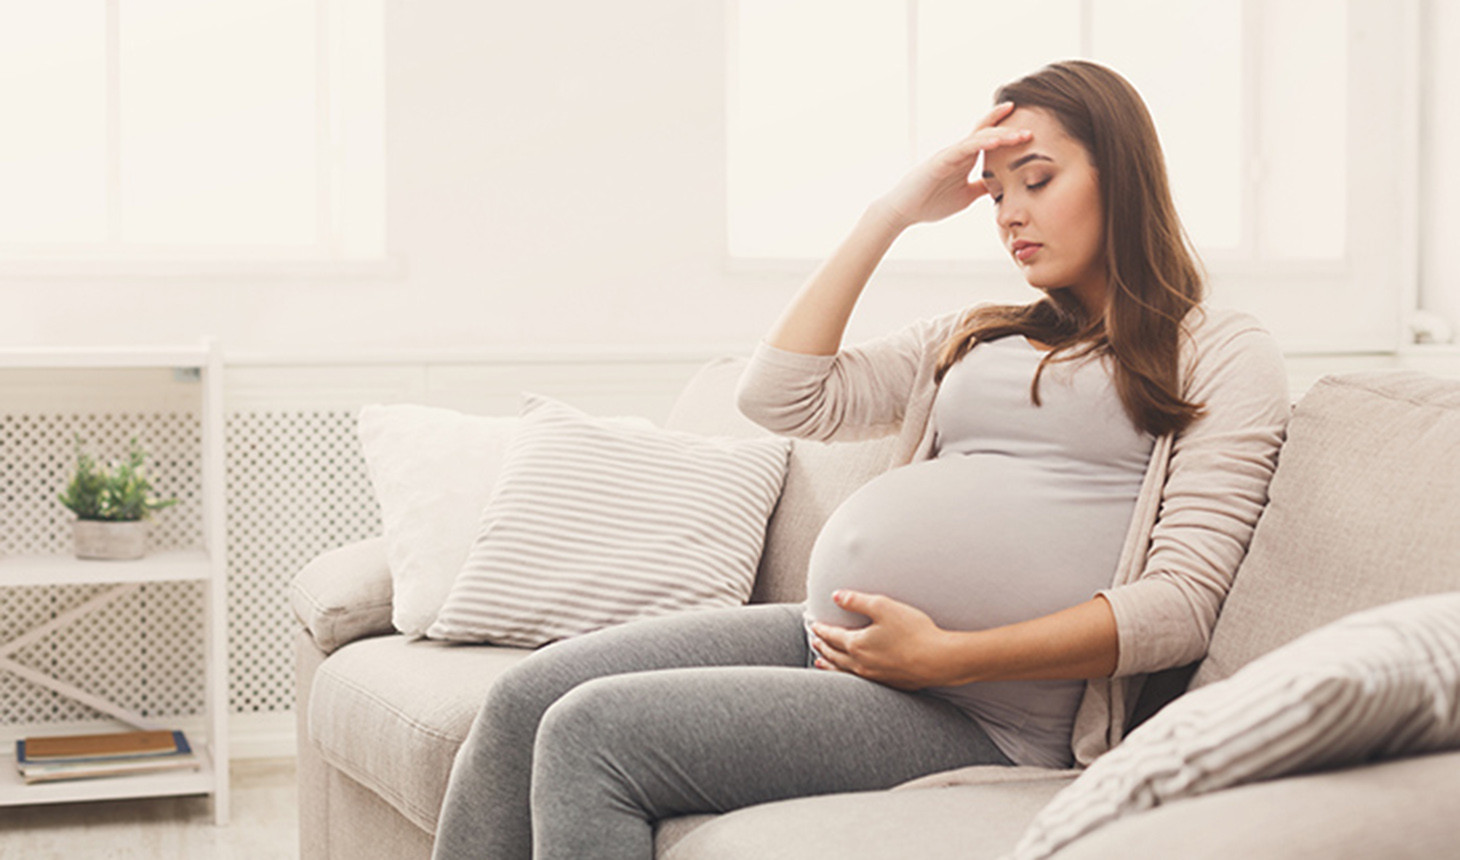 Pregnant Women and Migraines